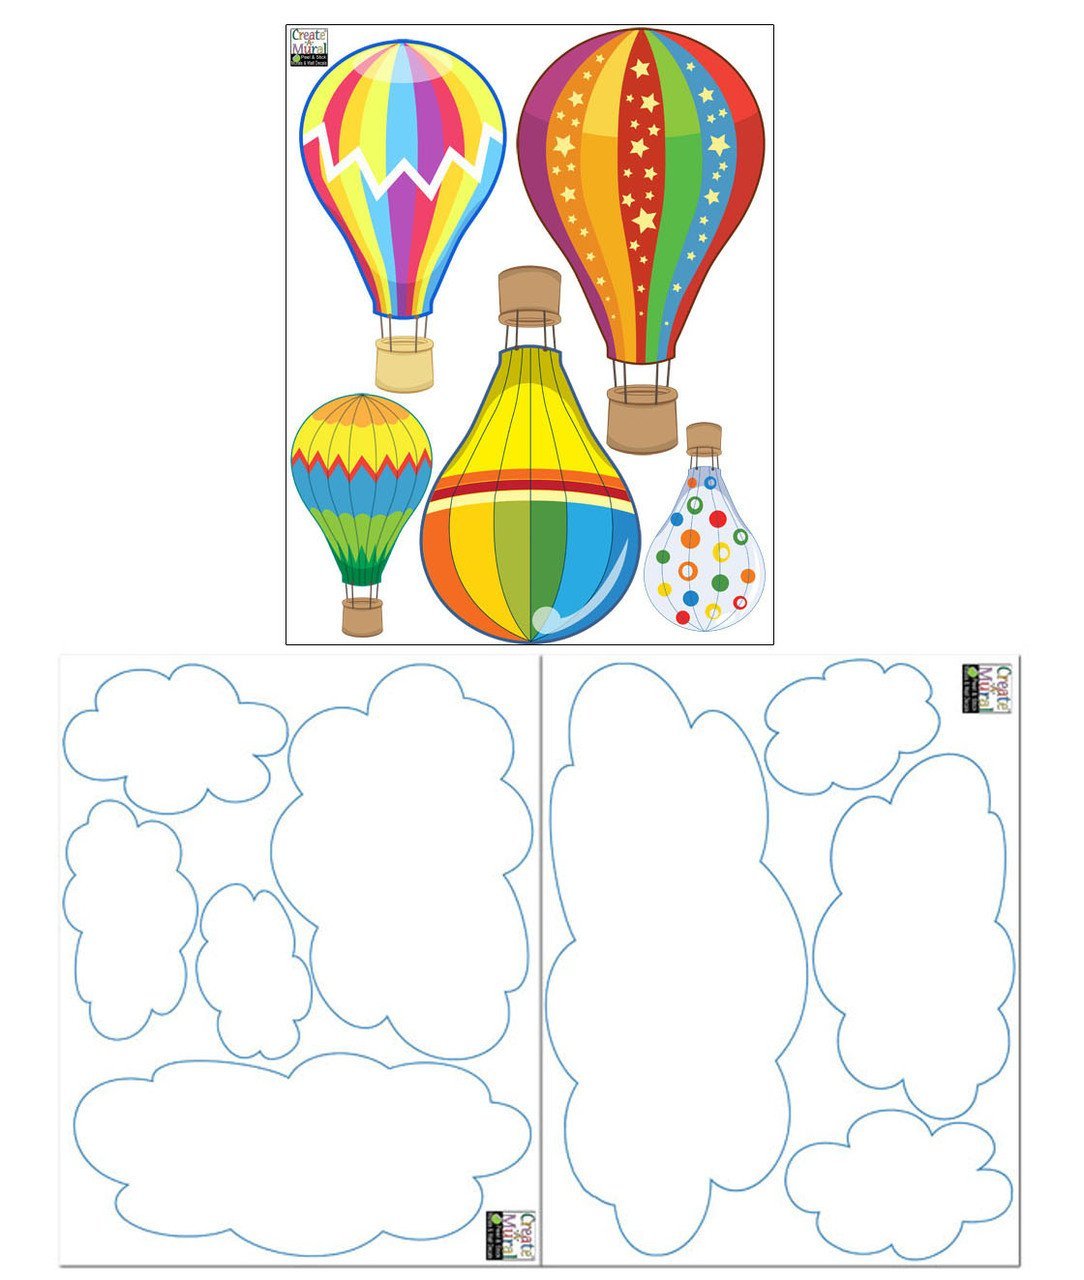 Decalcomania Wall Decor Hot Air Balloon Wall Decals - Set of 10 Aircraft Decoration Decal Removable Peel and Stick Decals - 7.5 inch Wall dcor